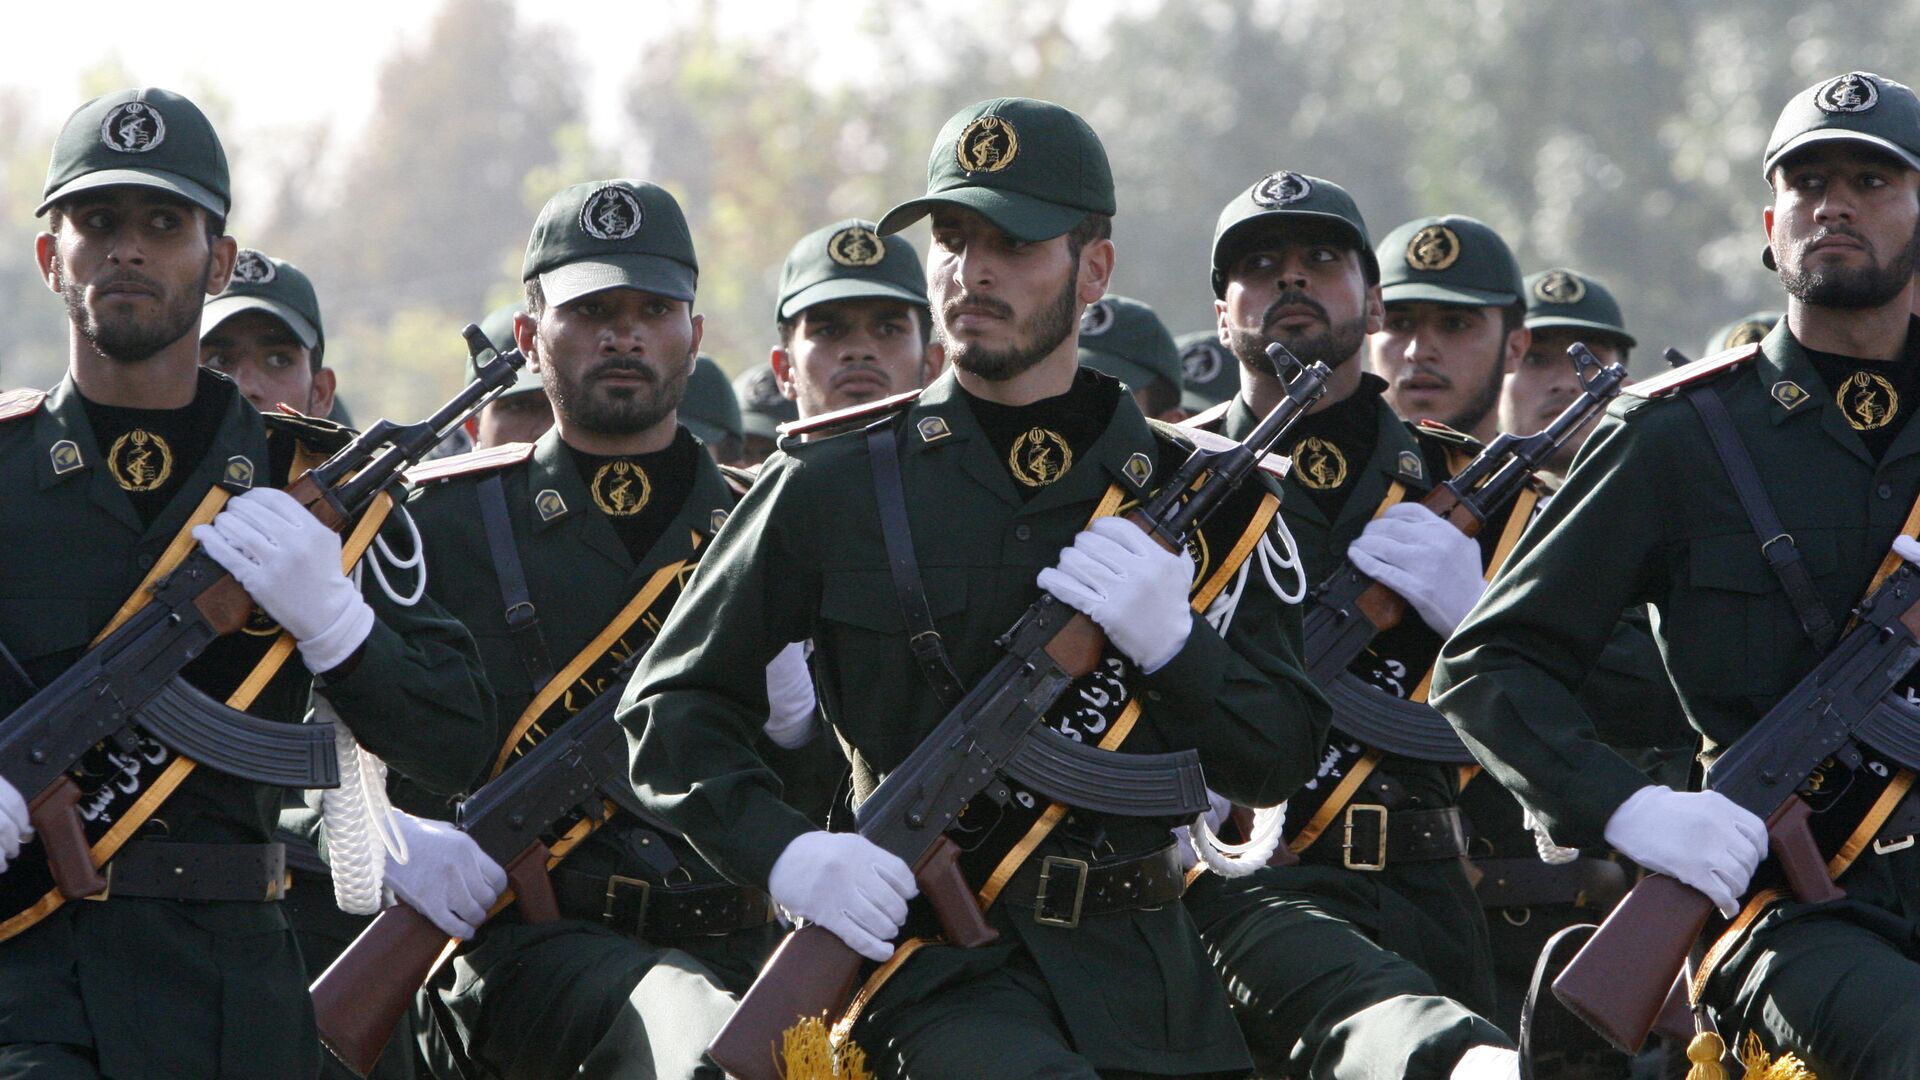 In this picture taken on Sunday, Sept. 21, 2008, Iranian Revolutionary Guards members march during a parade ceremony, marking the 28th anniversary of the onset of the Iran-Iraq war (1980-1988), in front of the mausoleum of the late revolutionary founder Ayatollah Ruhollah Khomeini, just outside Tehran, Iran - Sputnik International, 1920, 21.06.2021